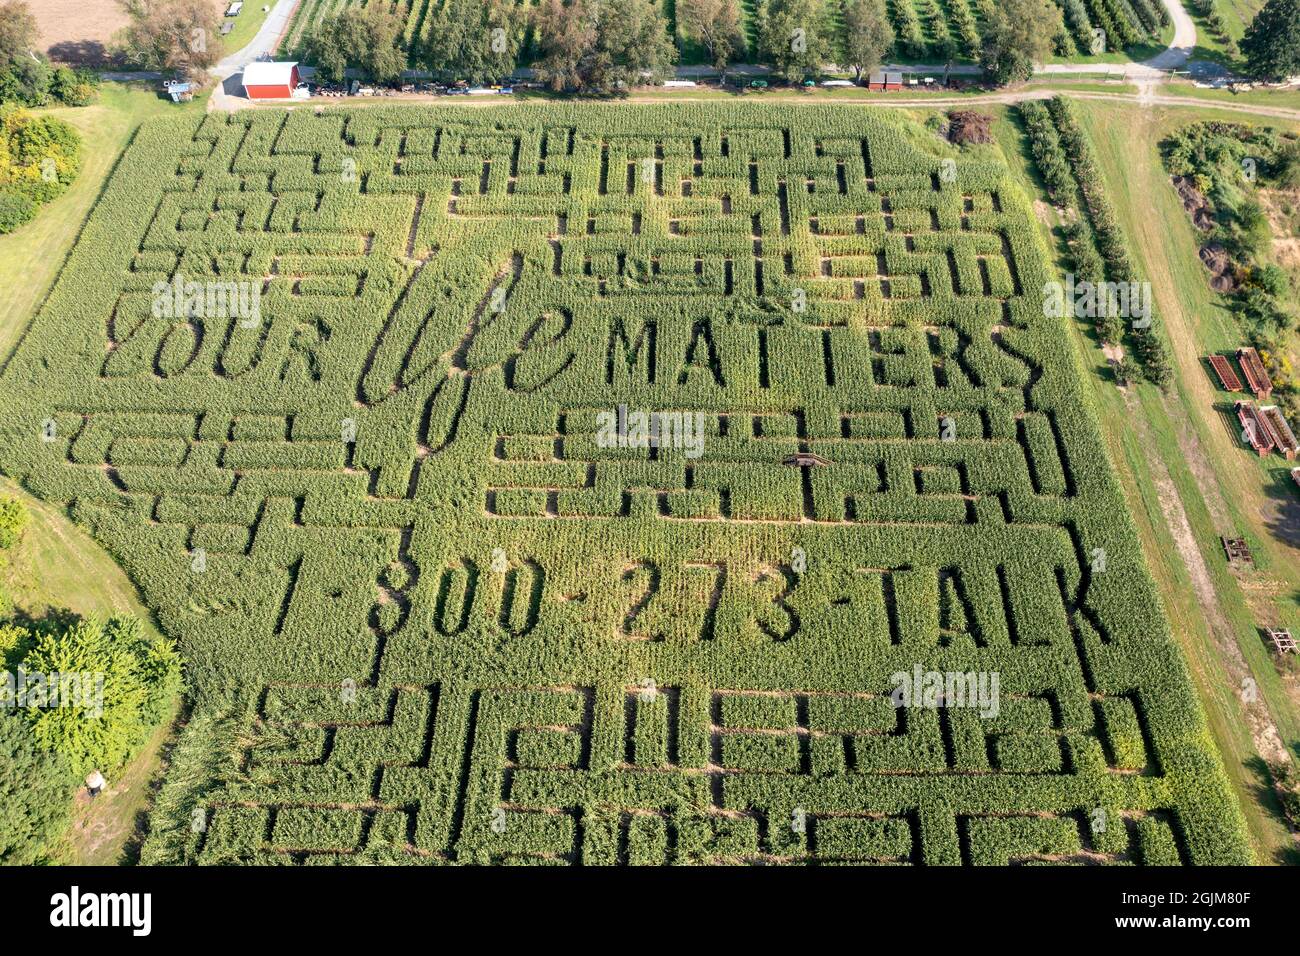 Richland, Michigan - A corn maze with a suicide prevention theme at Gull Meadow Farms. Stock Photo